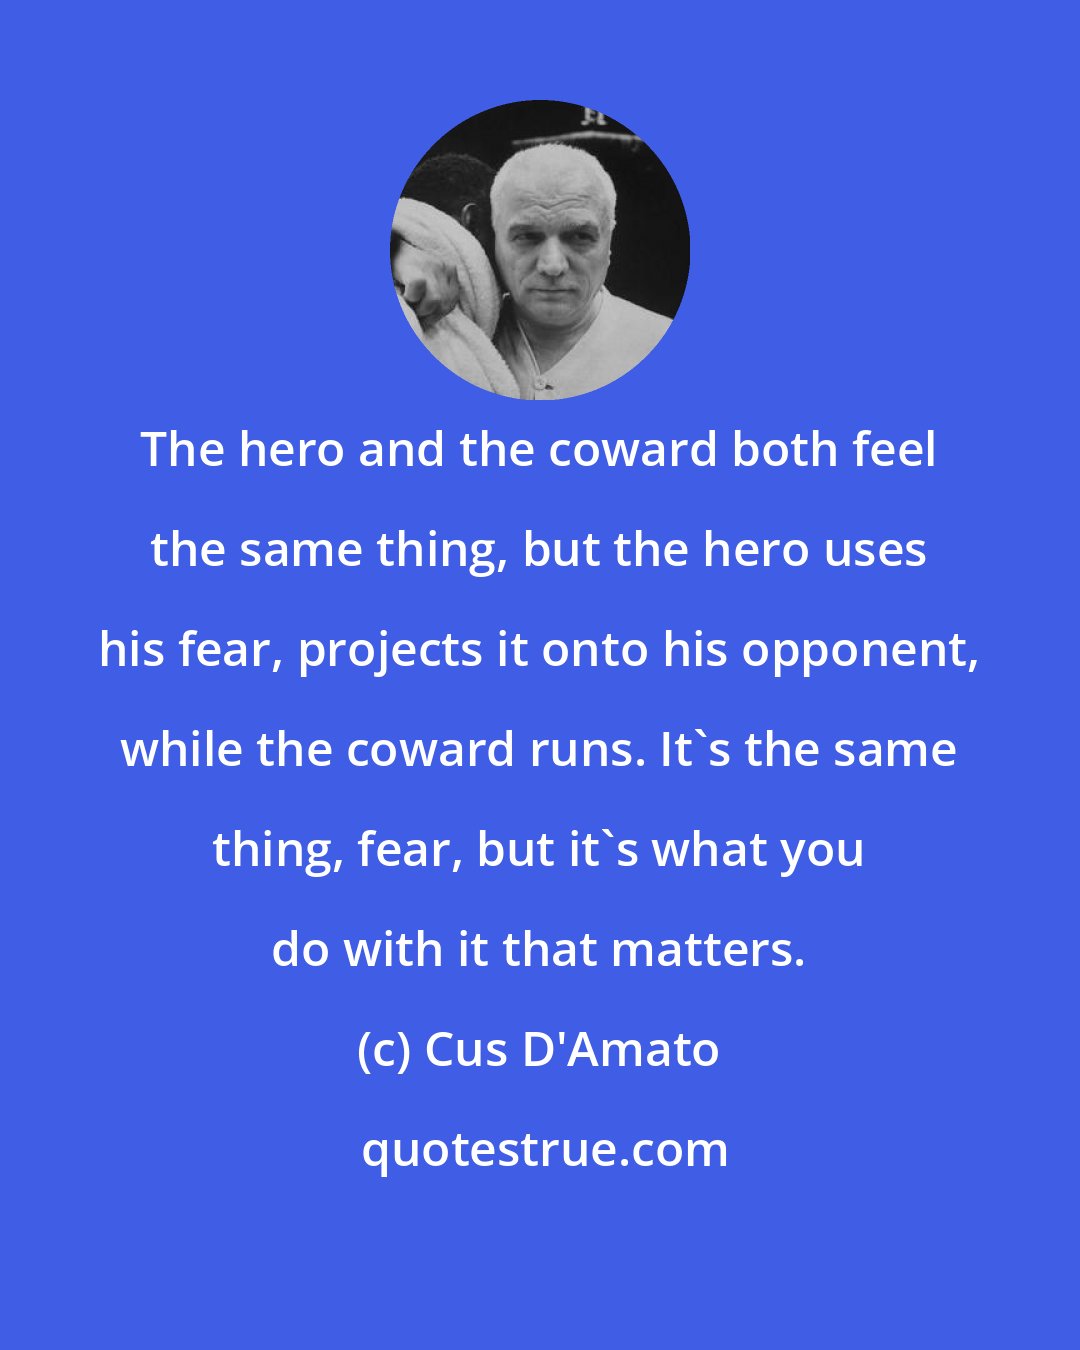 Cus D'Amato: The hero and the coward both feel the same thing, but the hero uses his fear, projects it onto his opponent, while the coward runs. It's the same thing, fear, but it's what you do with it that matters.